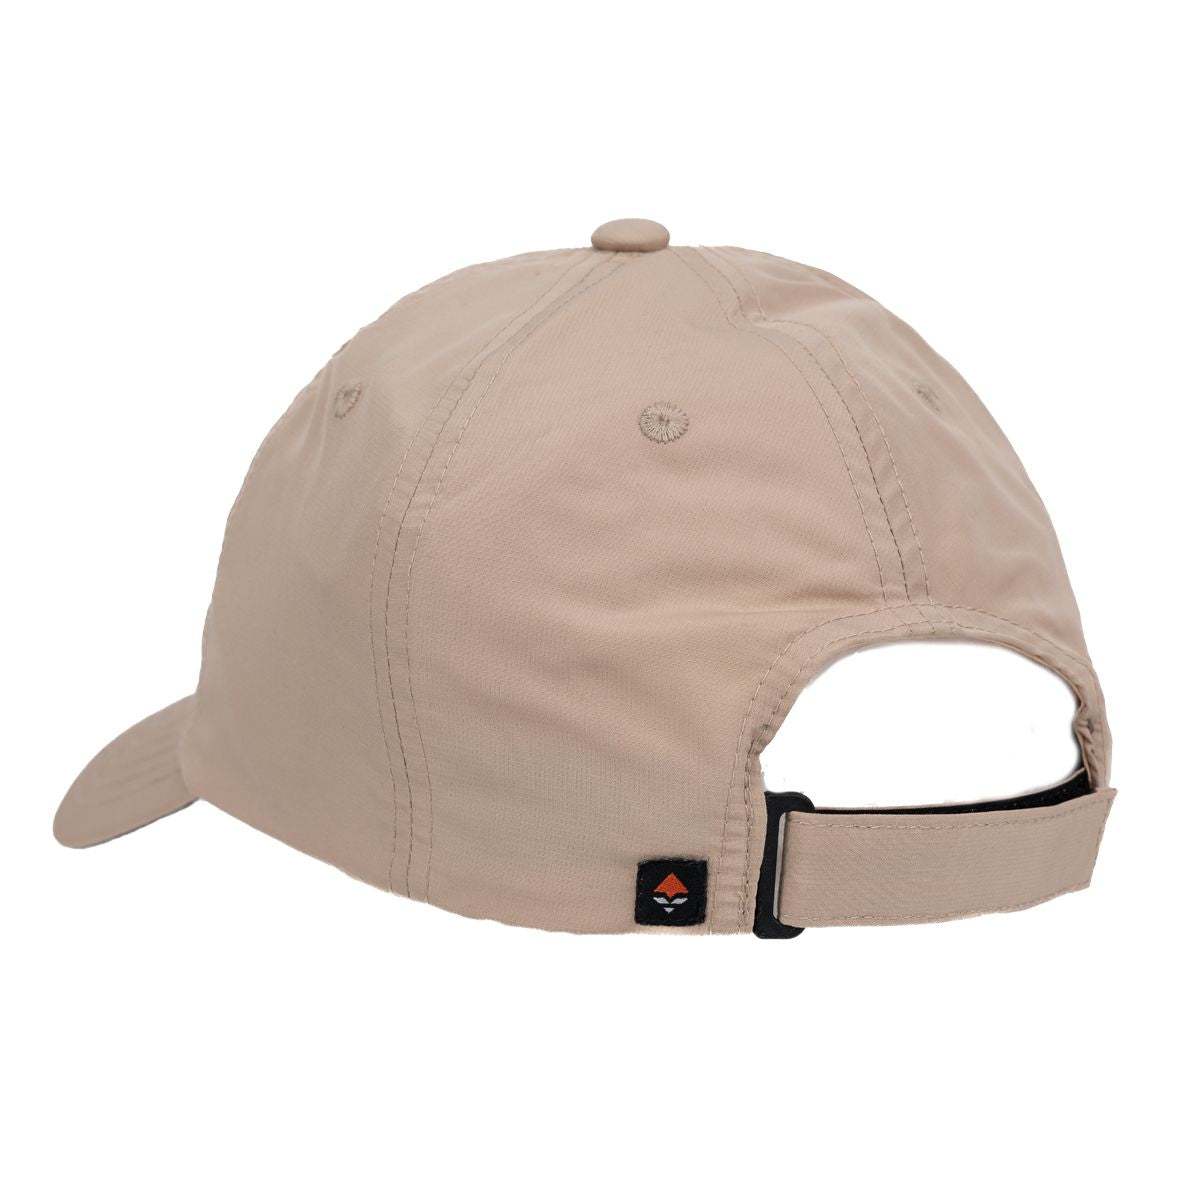 GOHUNT Topo DH Hat in Sand by GOHUNT | GOHUNT - GOHUNT Shop